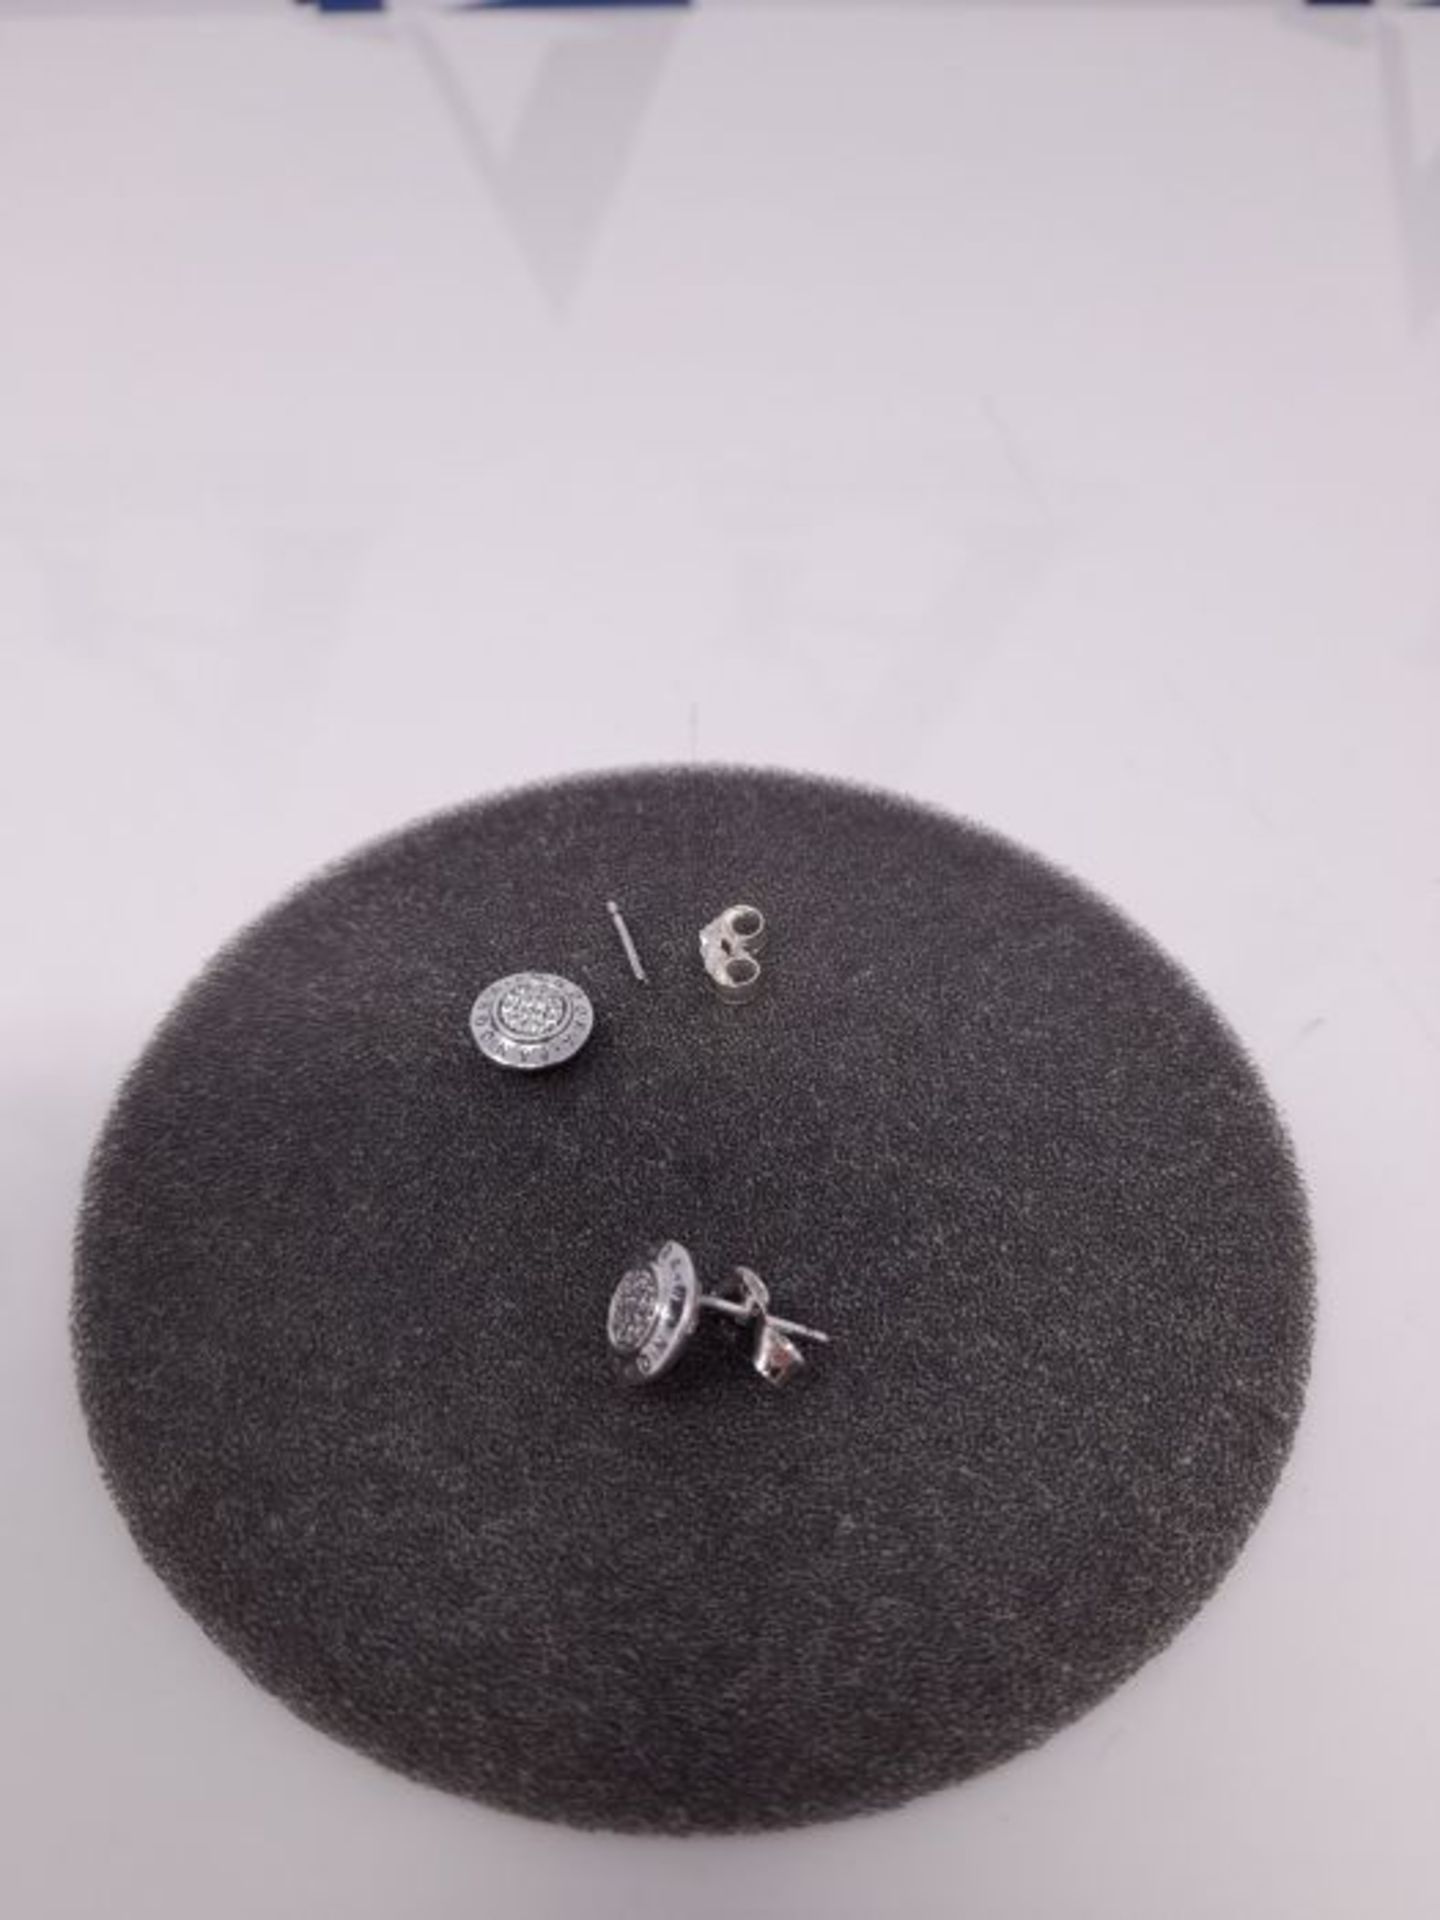 [CRACKED] Sterling silver earrings PANDORA ref: 290559CZ - Image 3 of 3